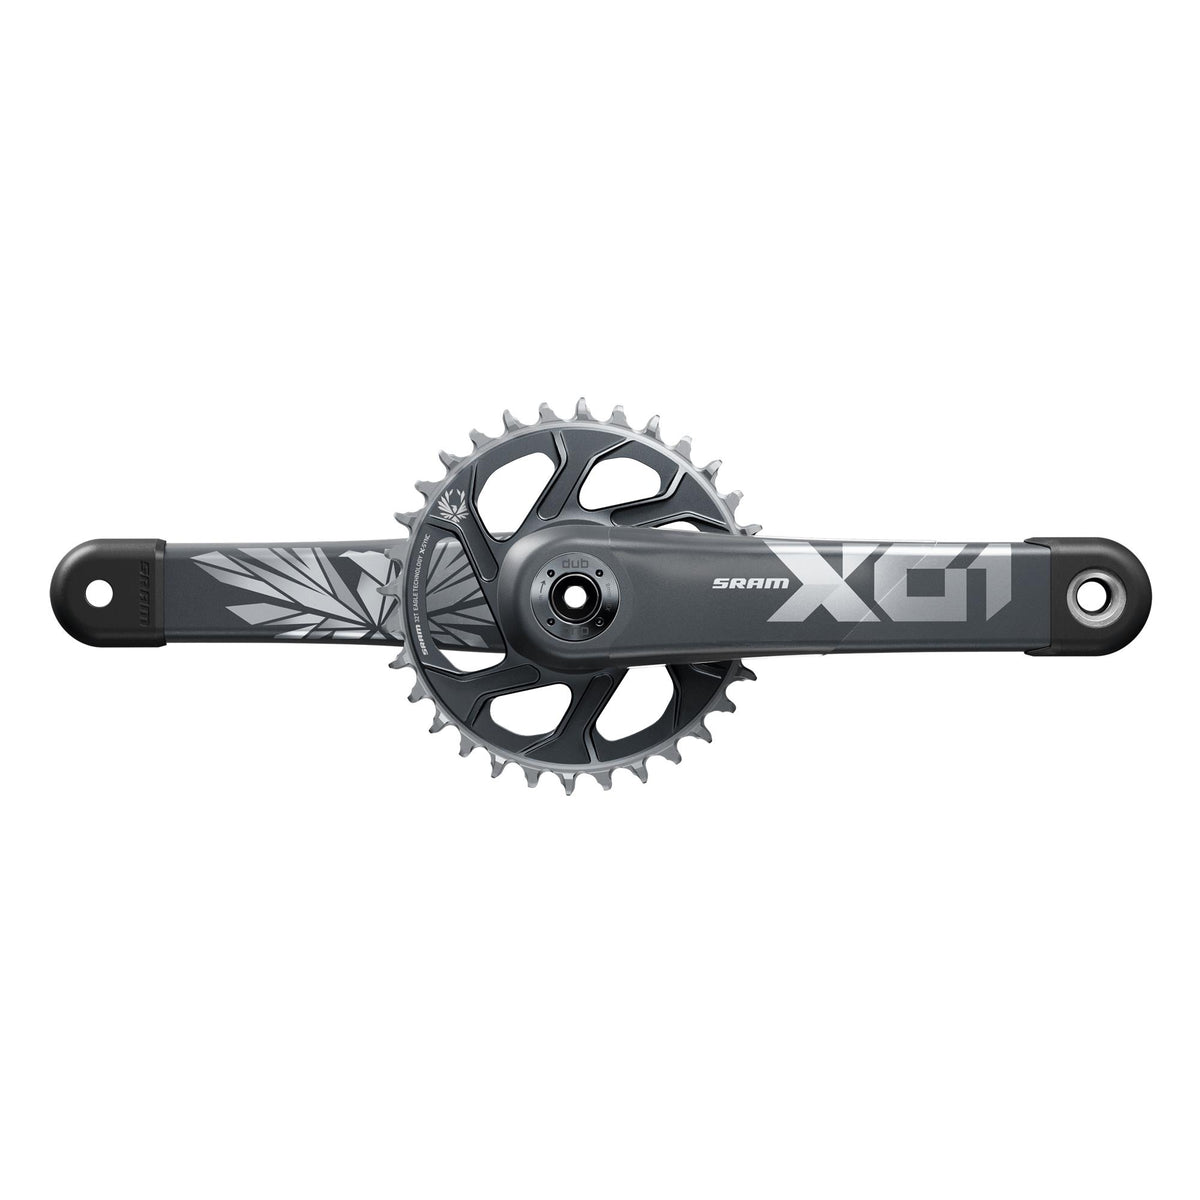 SRAM Crankset X01 Eagle Boost 148 Dub 12S With Direct Mount 32T X-Sync 2 Chainring (Dub Cups/Bearings Not Included) C2